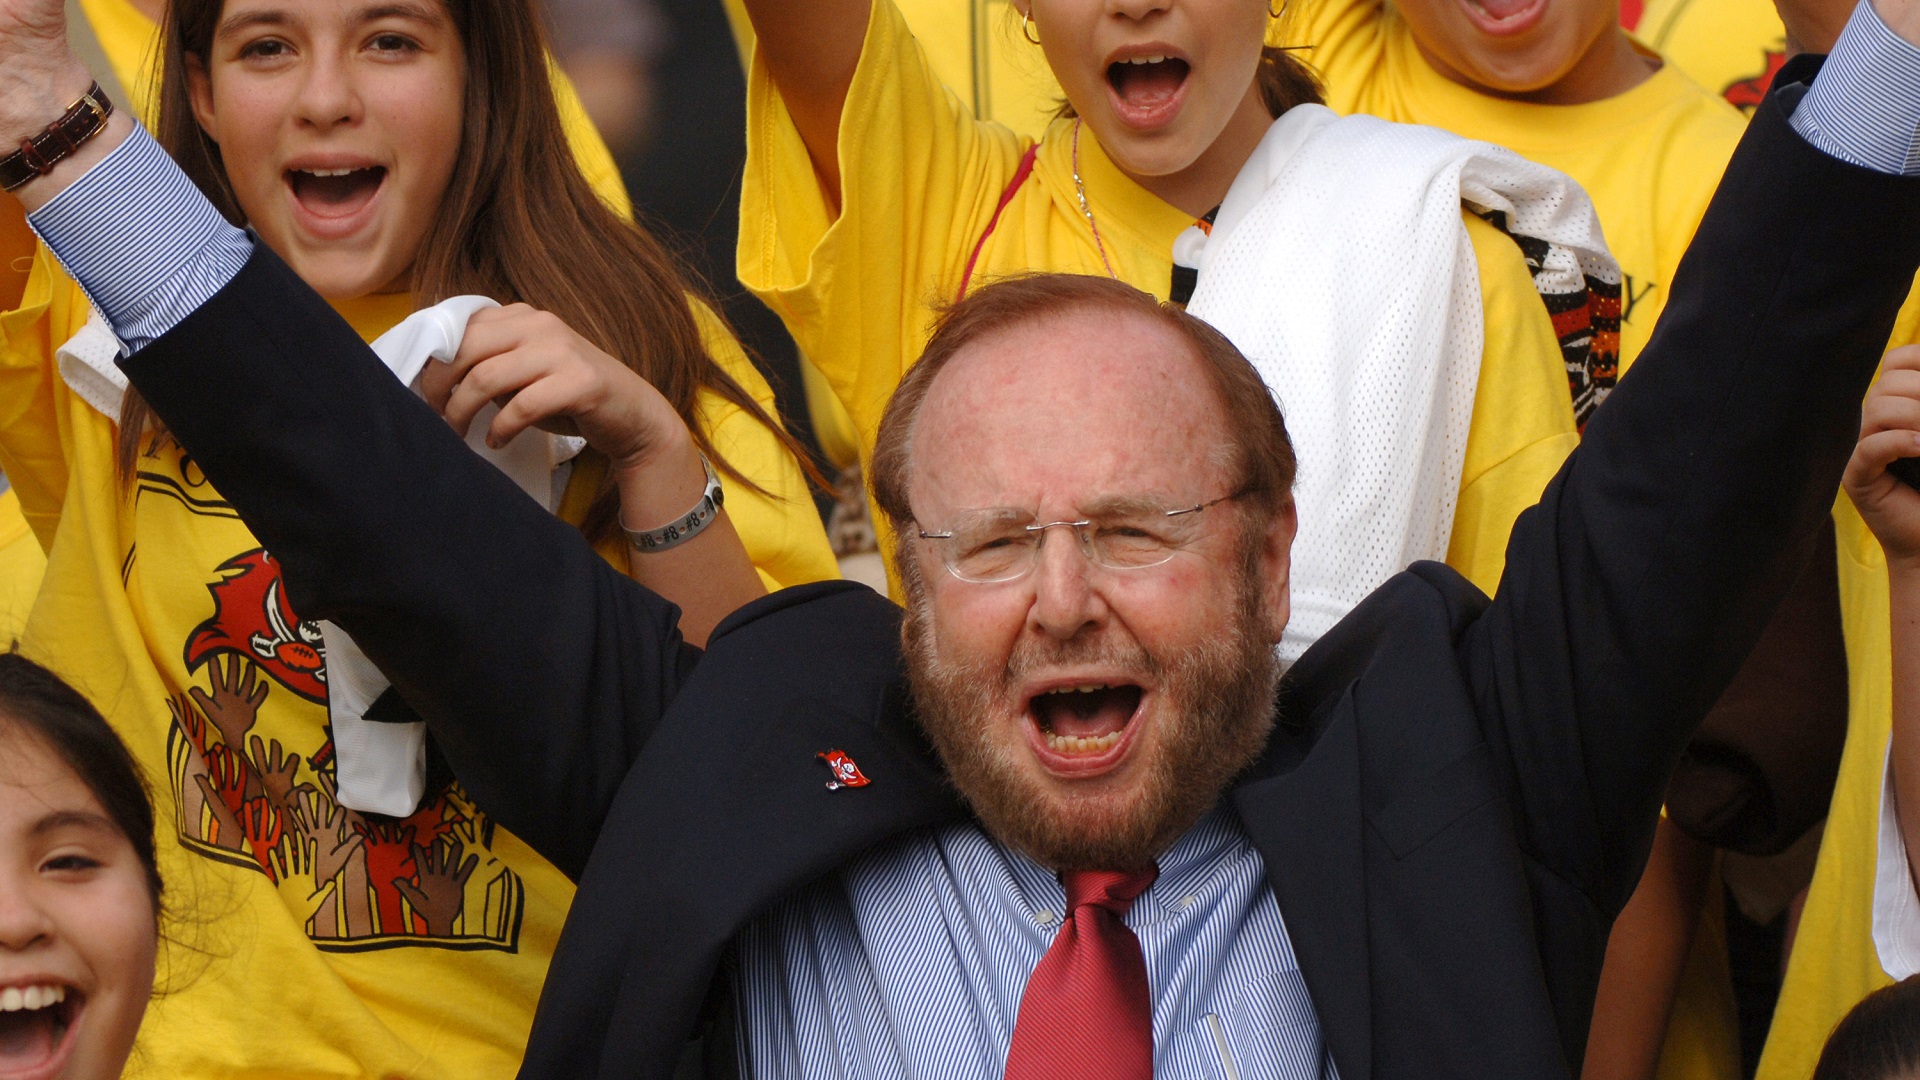 Who owns Manchester United & who are the Glazer family?